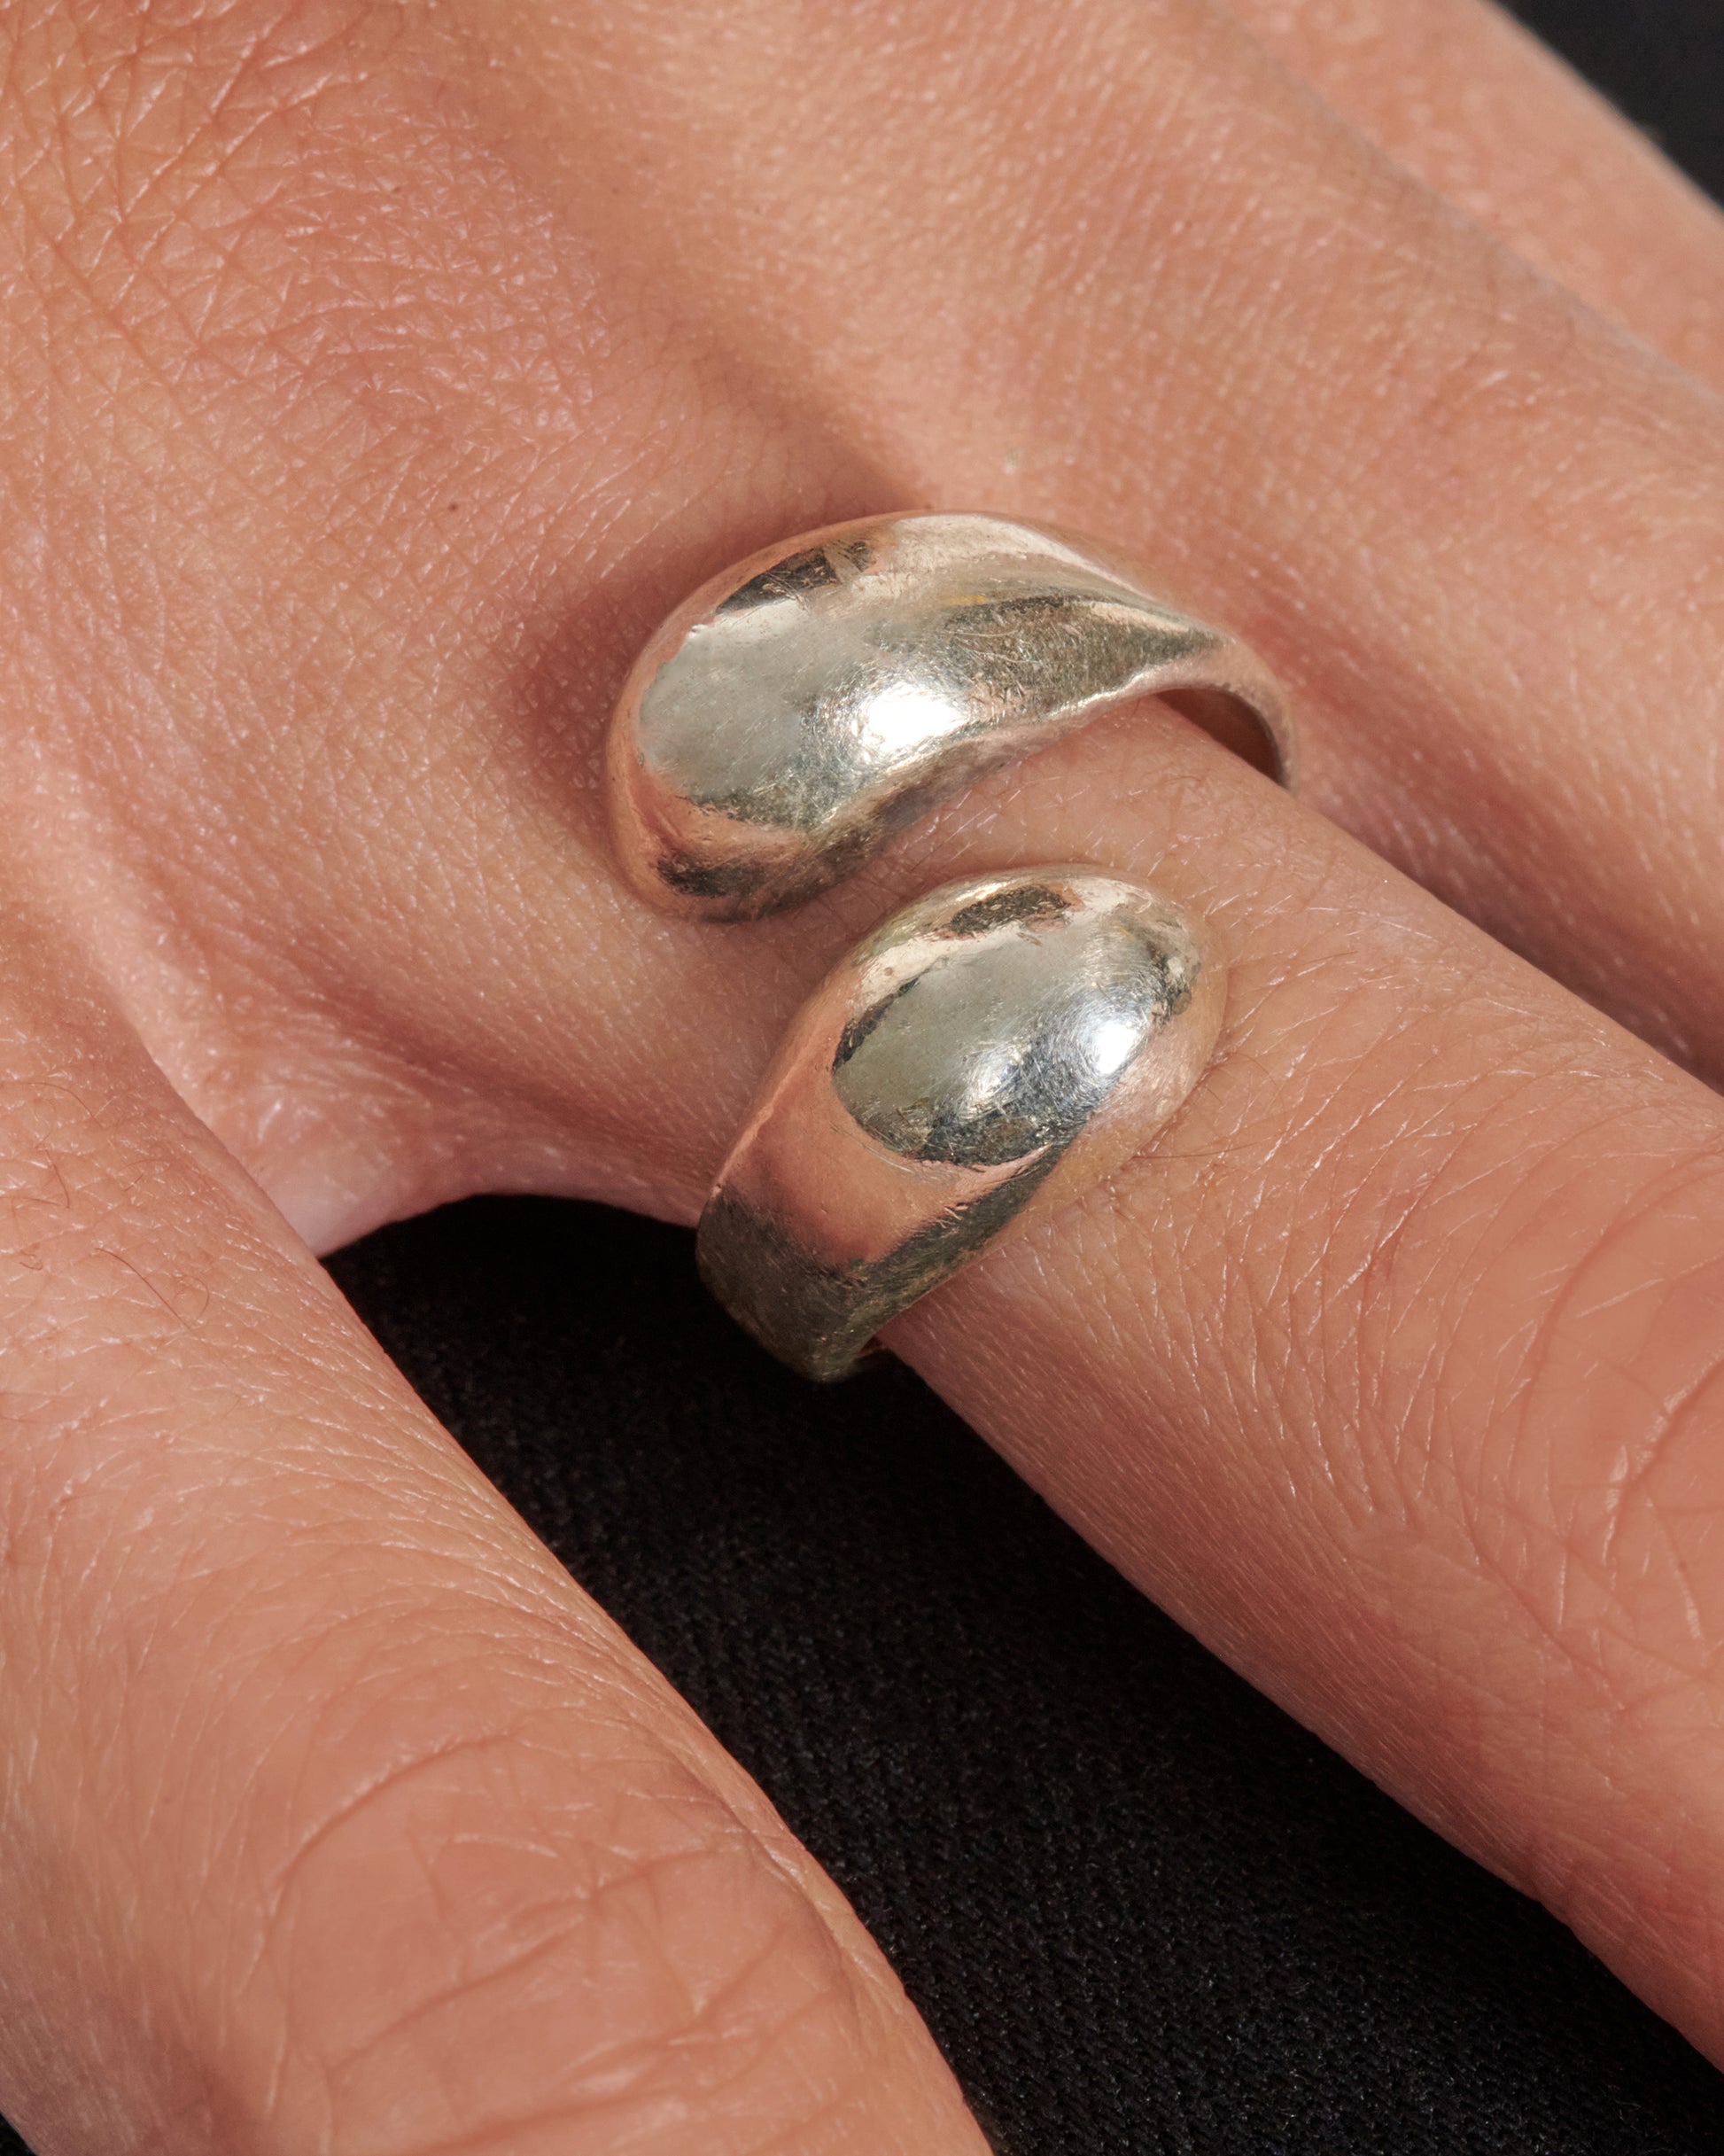 This vintage sterling silver ring wraps your finger comfortably. The smooth, rounded ends make this an easy-going, yet bold addition to your daily lineup.